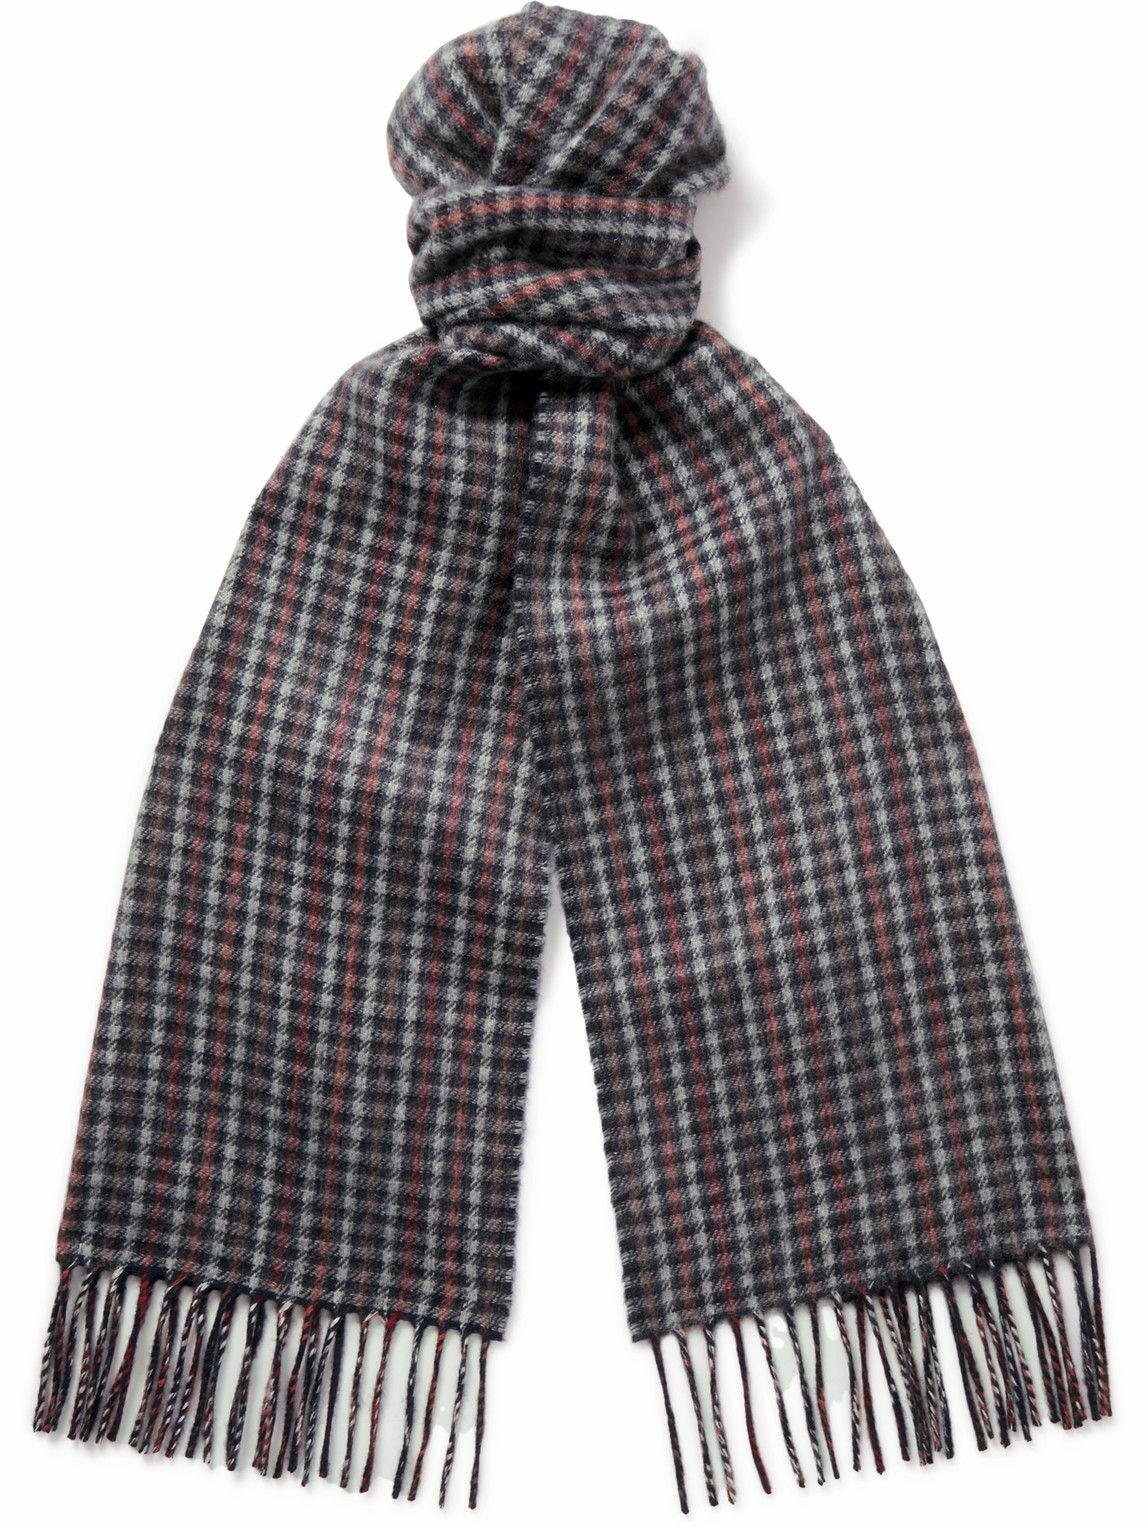 Photo: Johnstons of Elgin - Reversible Fringed Houndstooth and Striped Cashmere Scarf